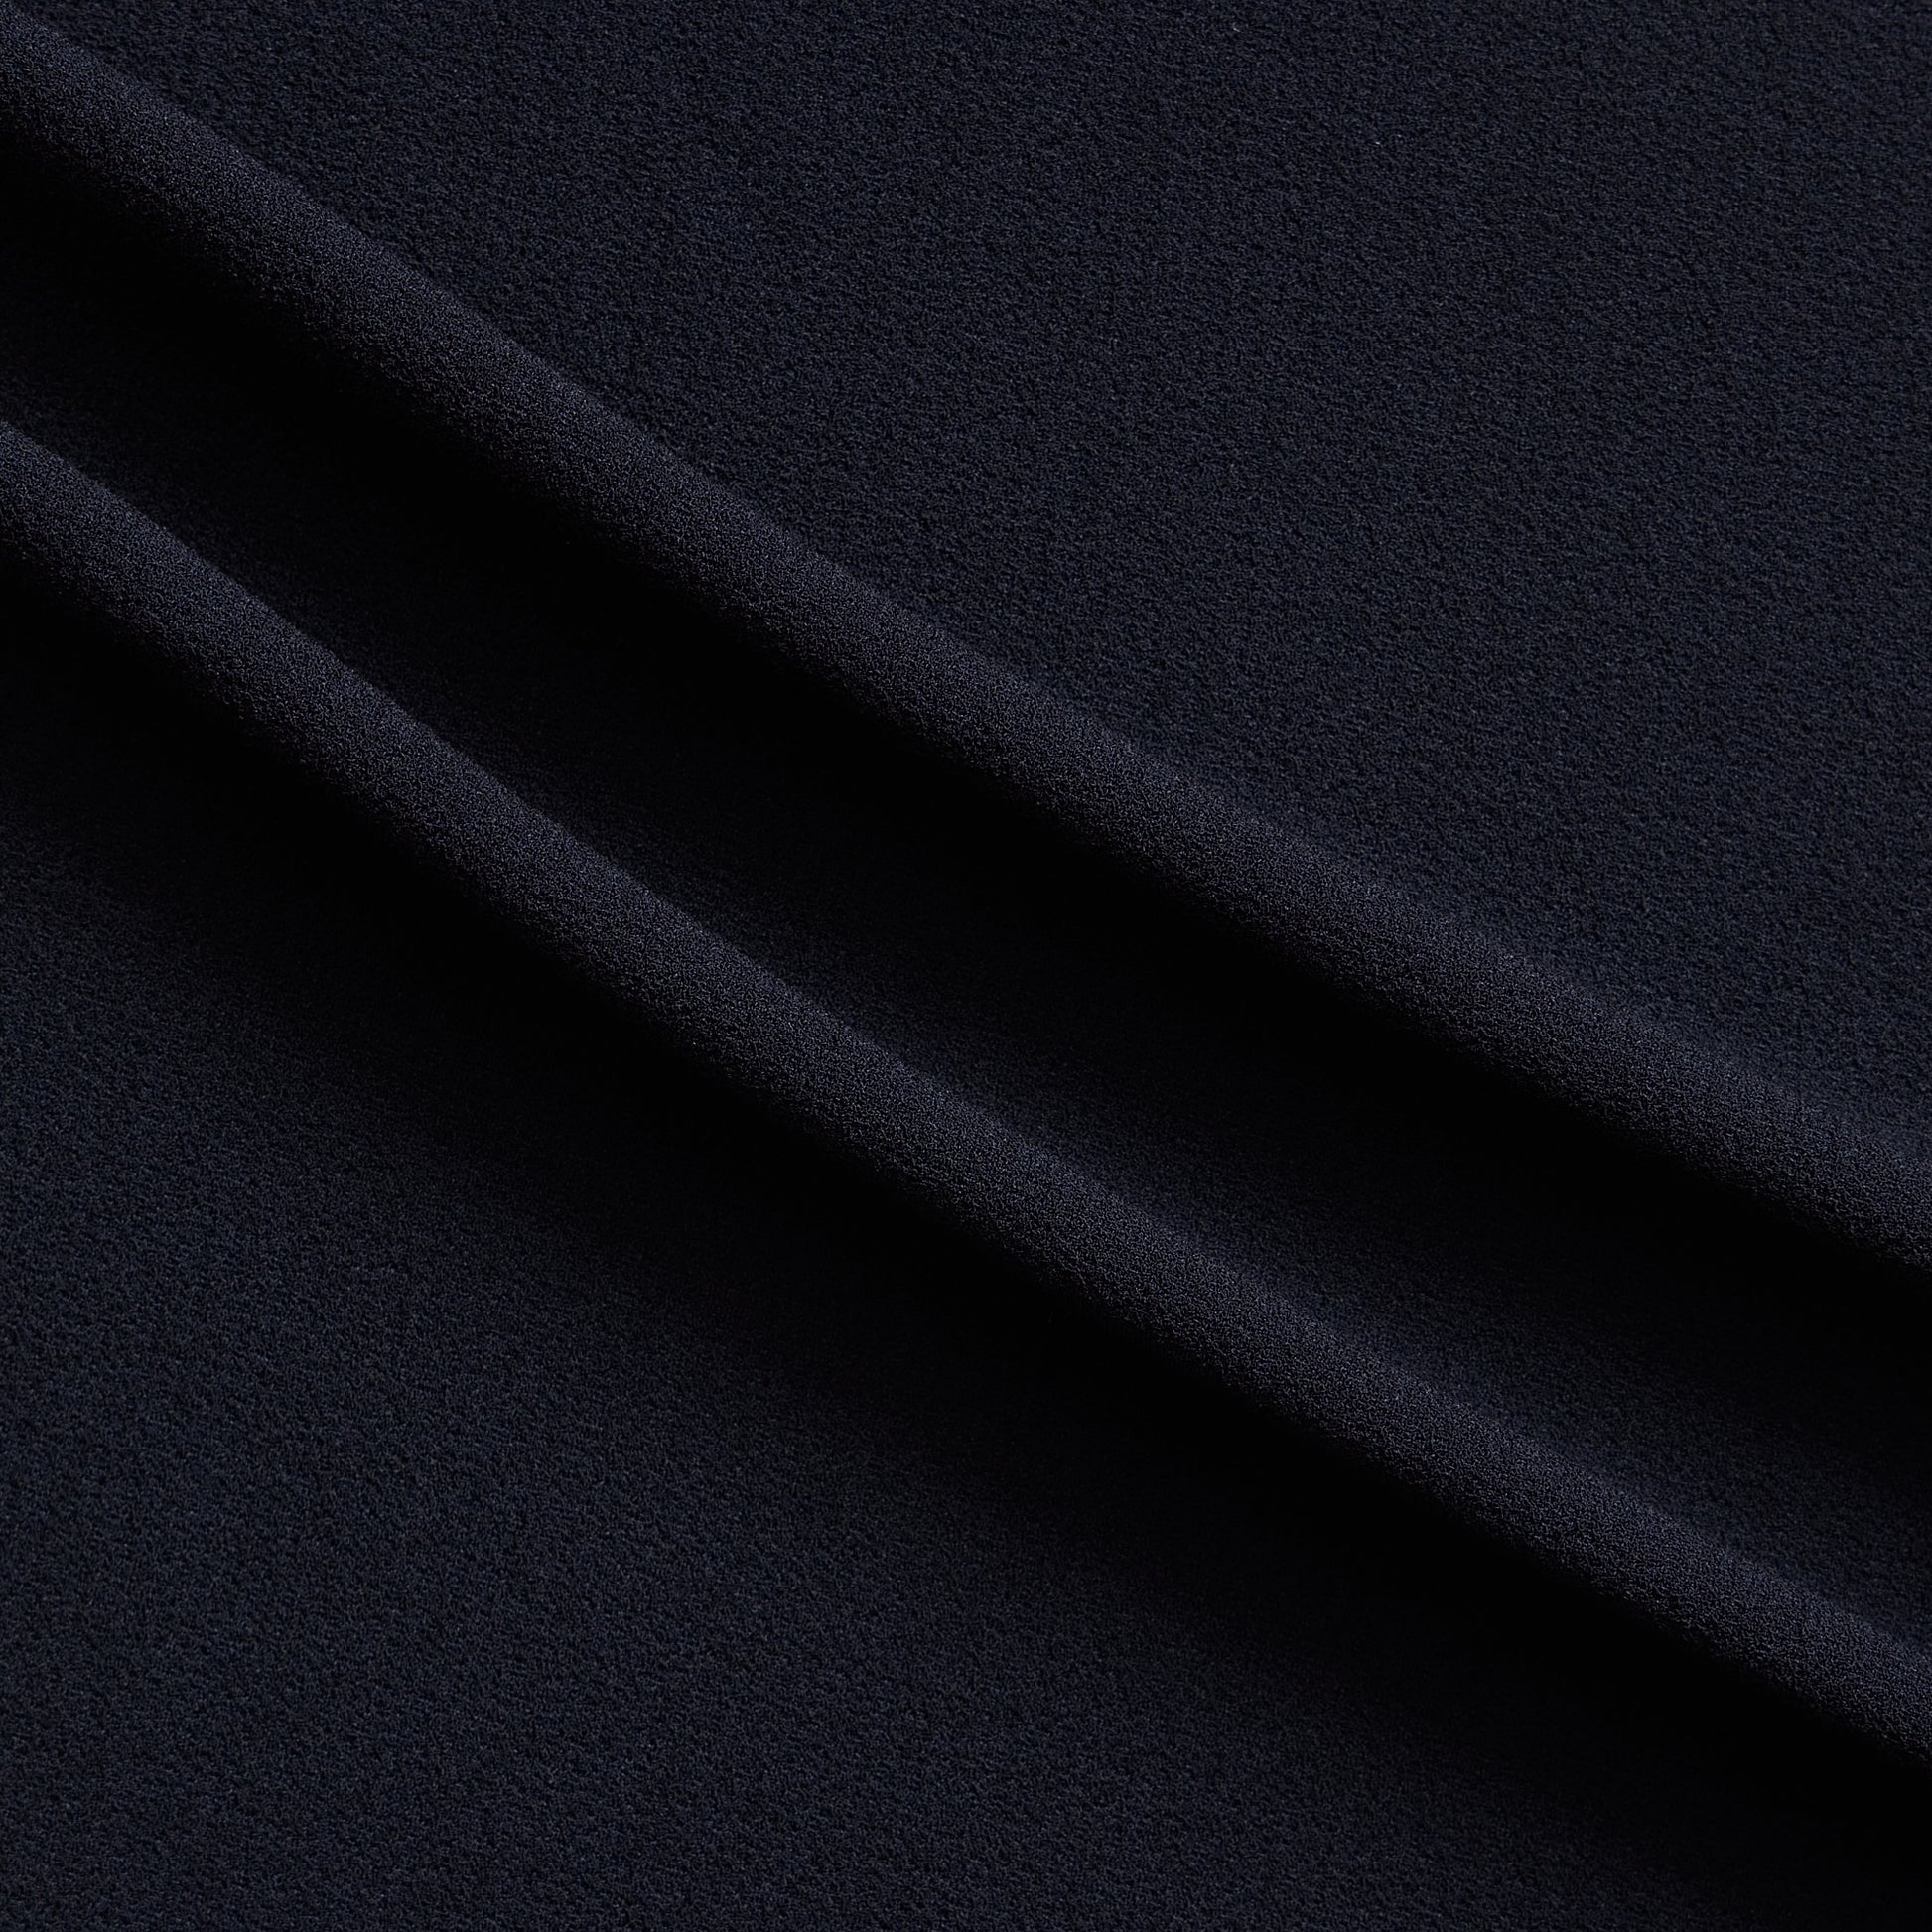 London Crepe presenting the navy color version with 2 way stretch knit polyester with spandex